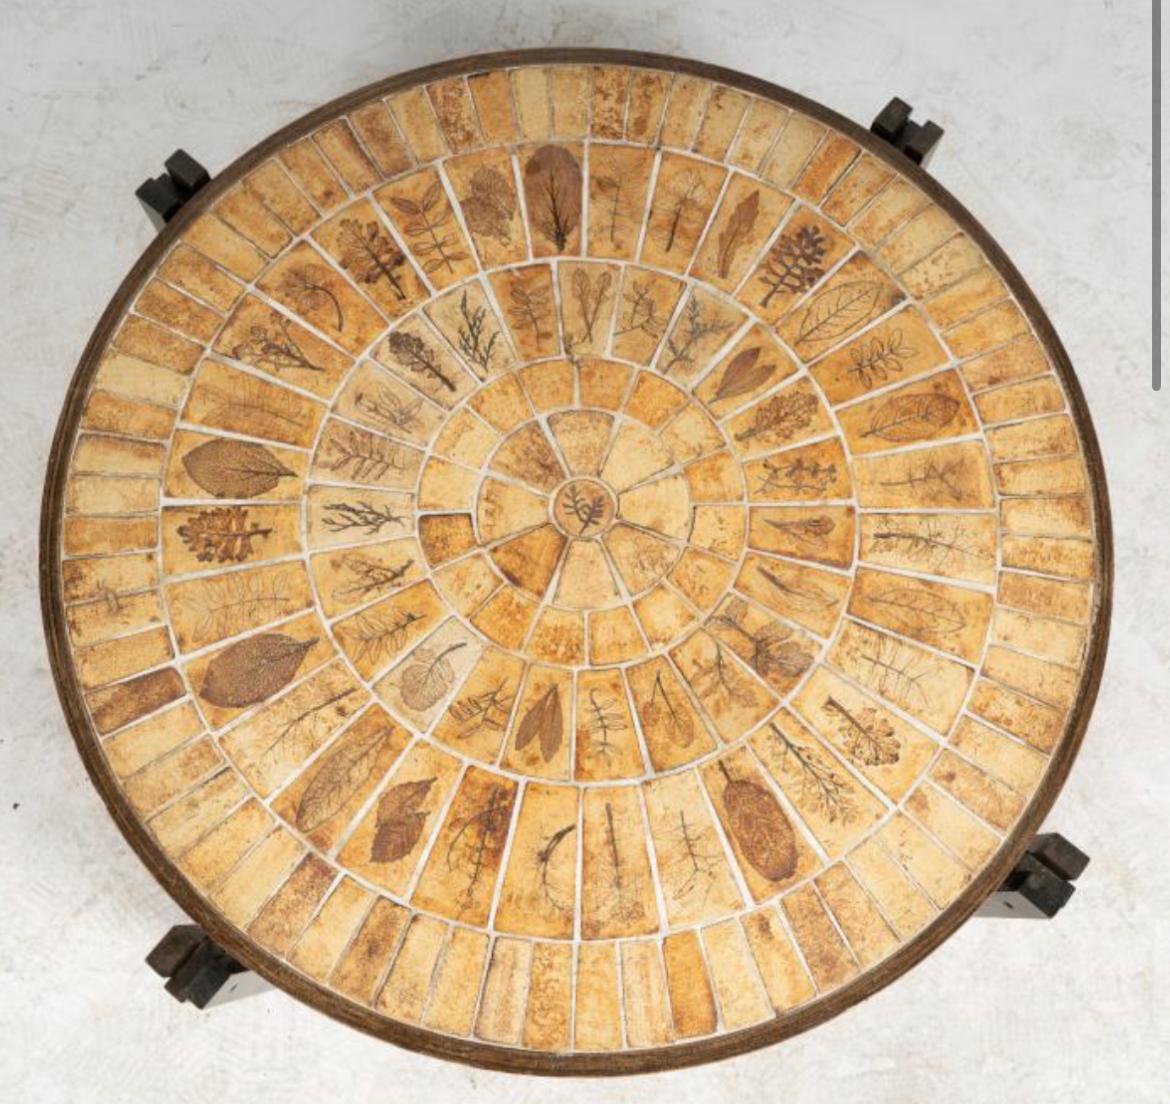 Round Coffee Table by Roger Capron, France, 1970s. Tile and stained wood; signed in tile; decorated with beautiful botanical designs.